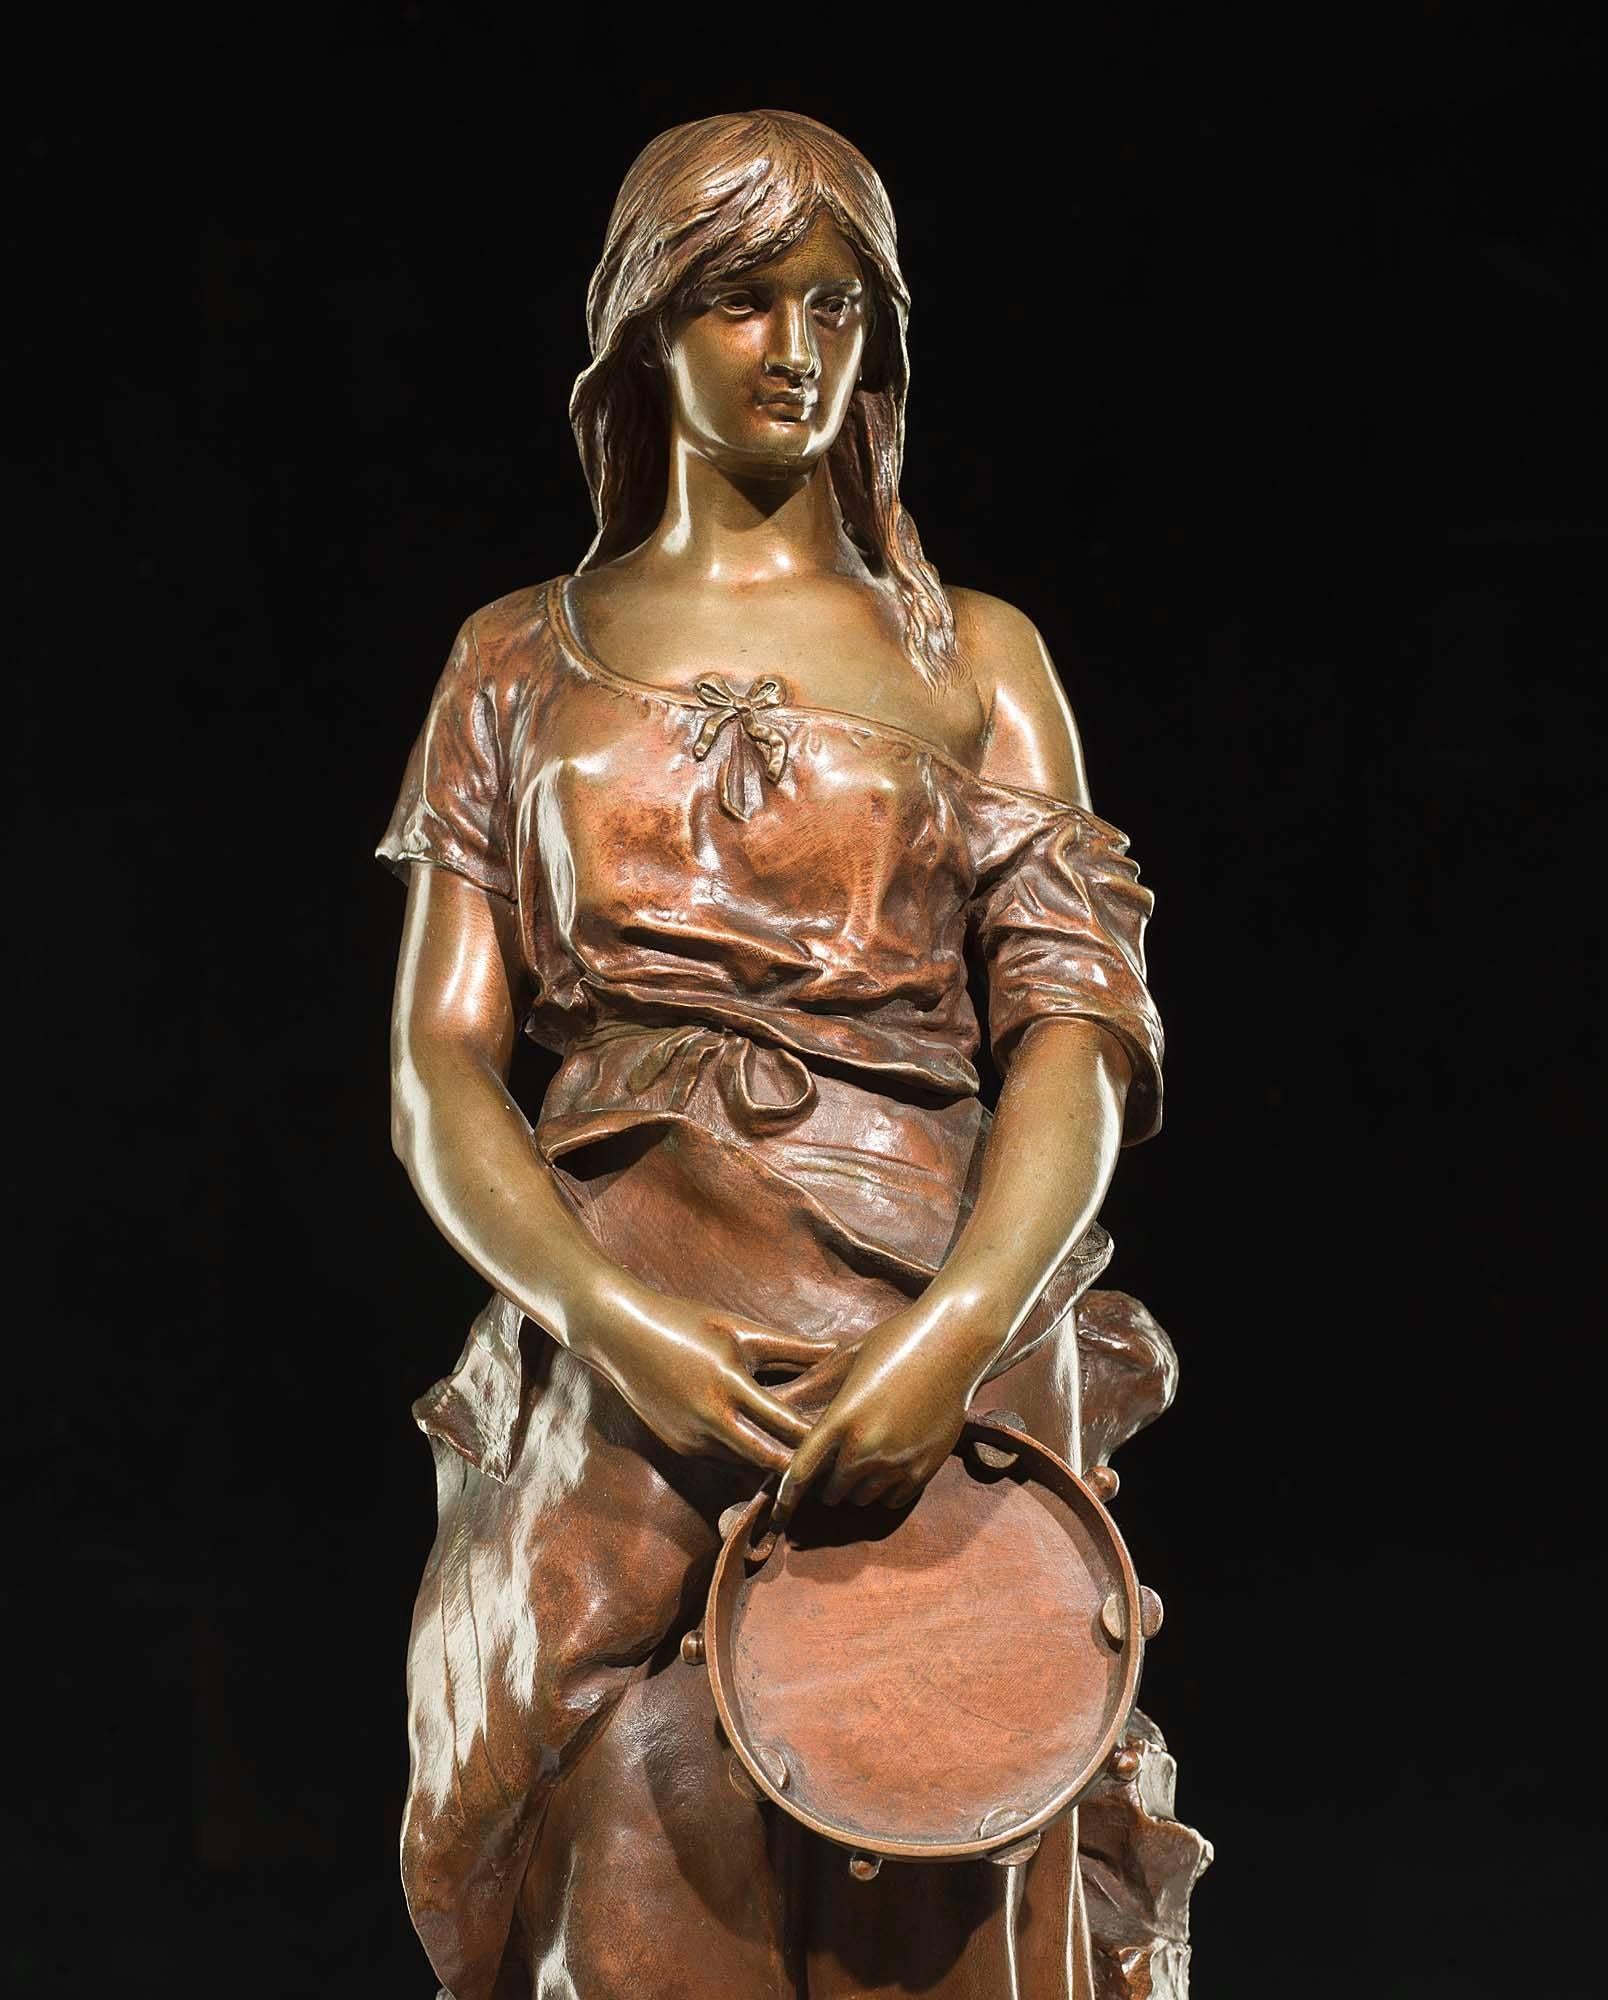 A 20th century bronze of a beautiful young gypsy maiden with a tambourine after the model by Claudius Marioton (1844-1919). The name Marioton and the number 126 are inscribed on the back. The original would have been made in Paris at the art